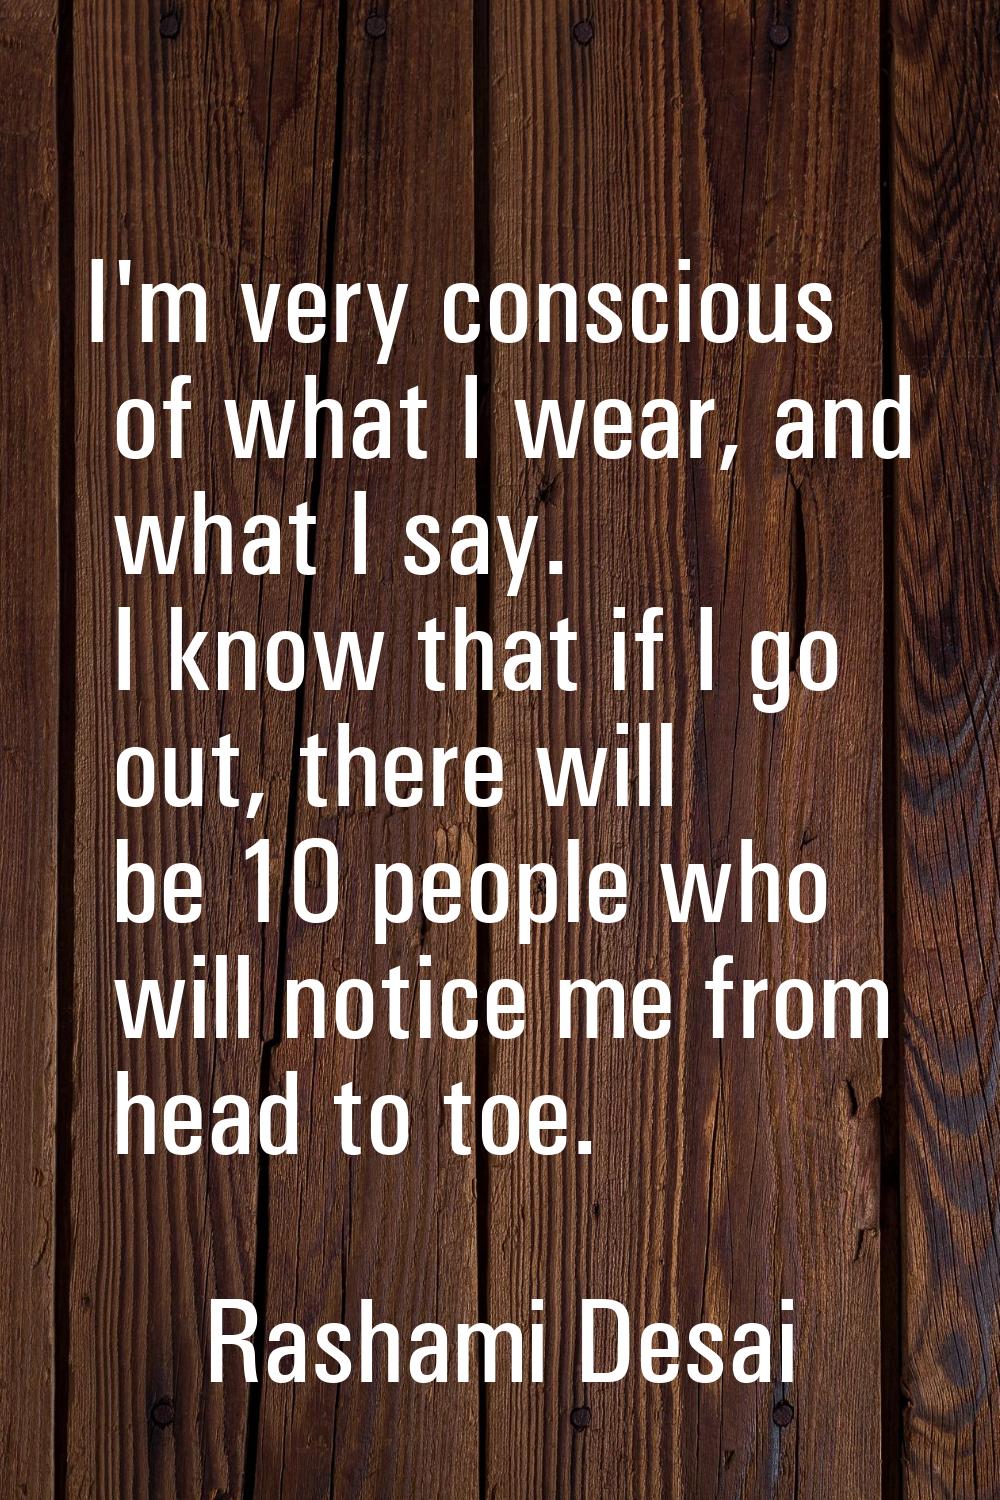 I'm very conscious of what I wear, and what I say. I know that if I go out, there will be 10 people